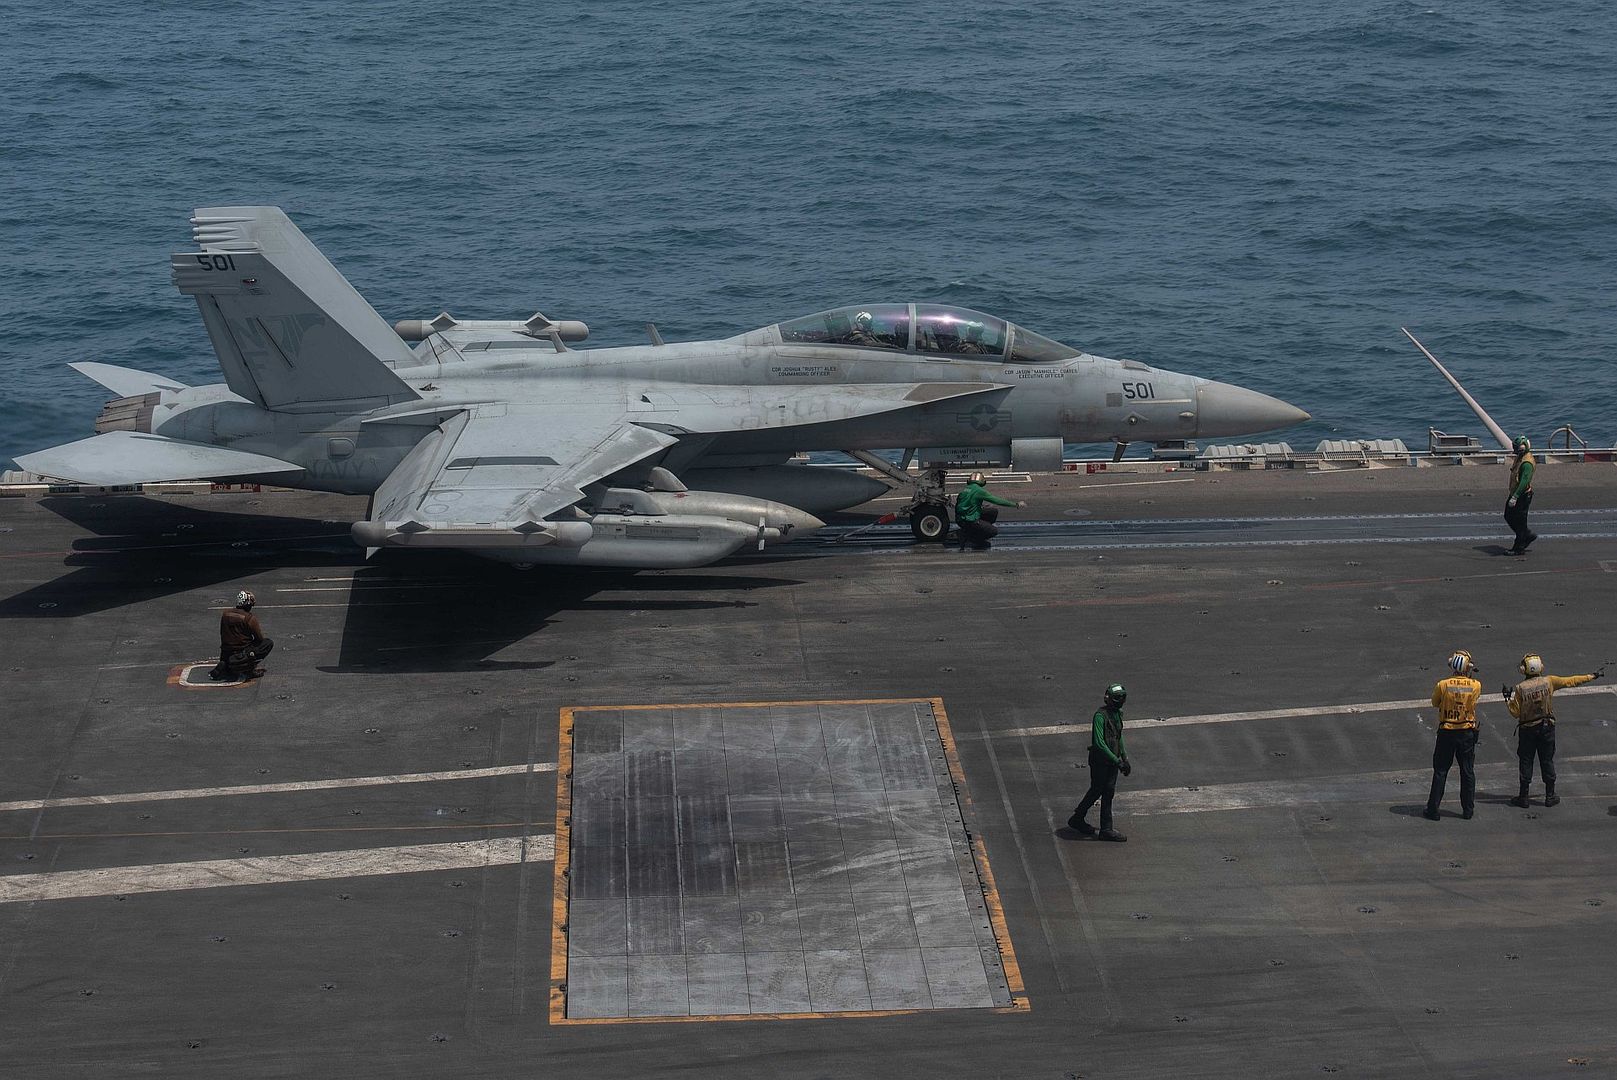 18G Growler Electronic Attack Aircraft Attached To The Shadowhawks Of Electronic Attack Squadron 141 On The Flight Deck Of Aircraft Carrier USS Ronald Reagan